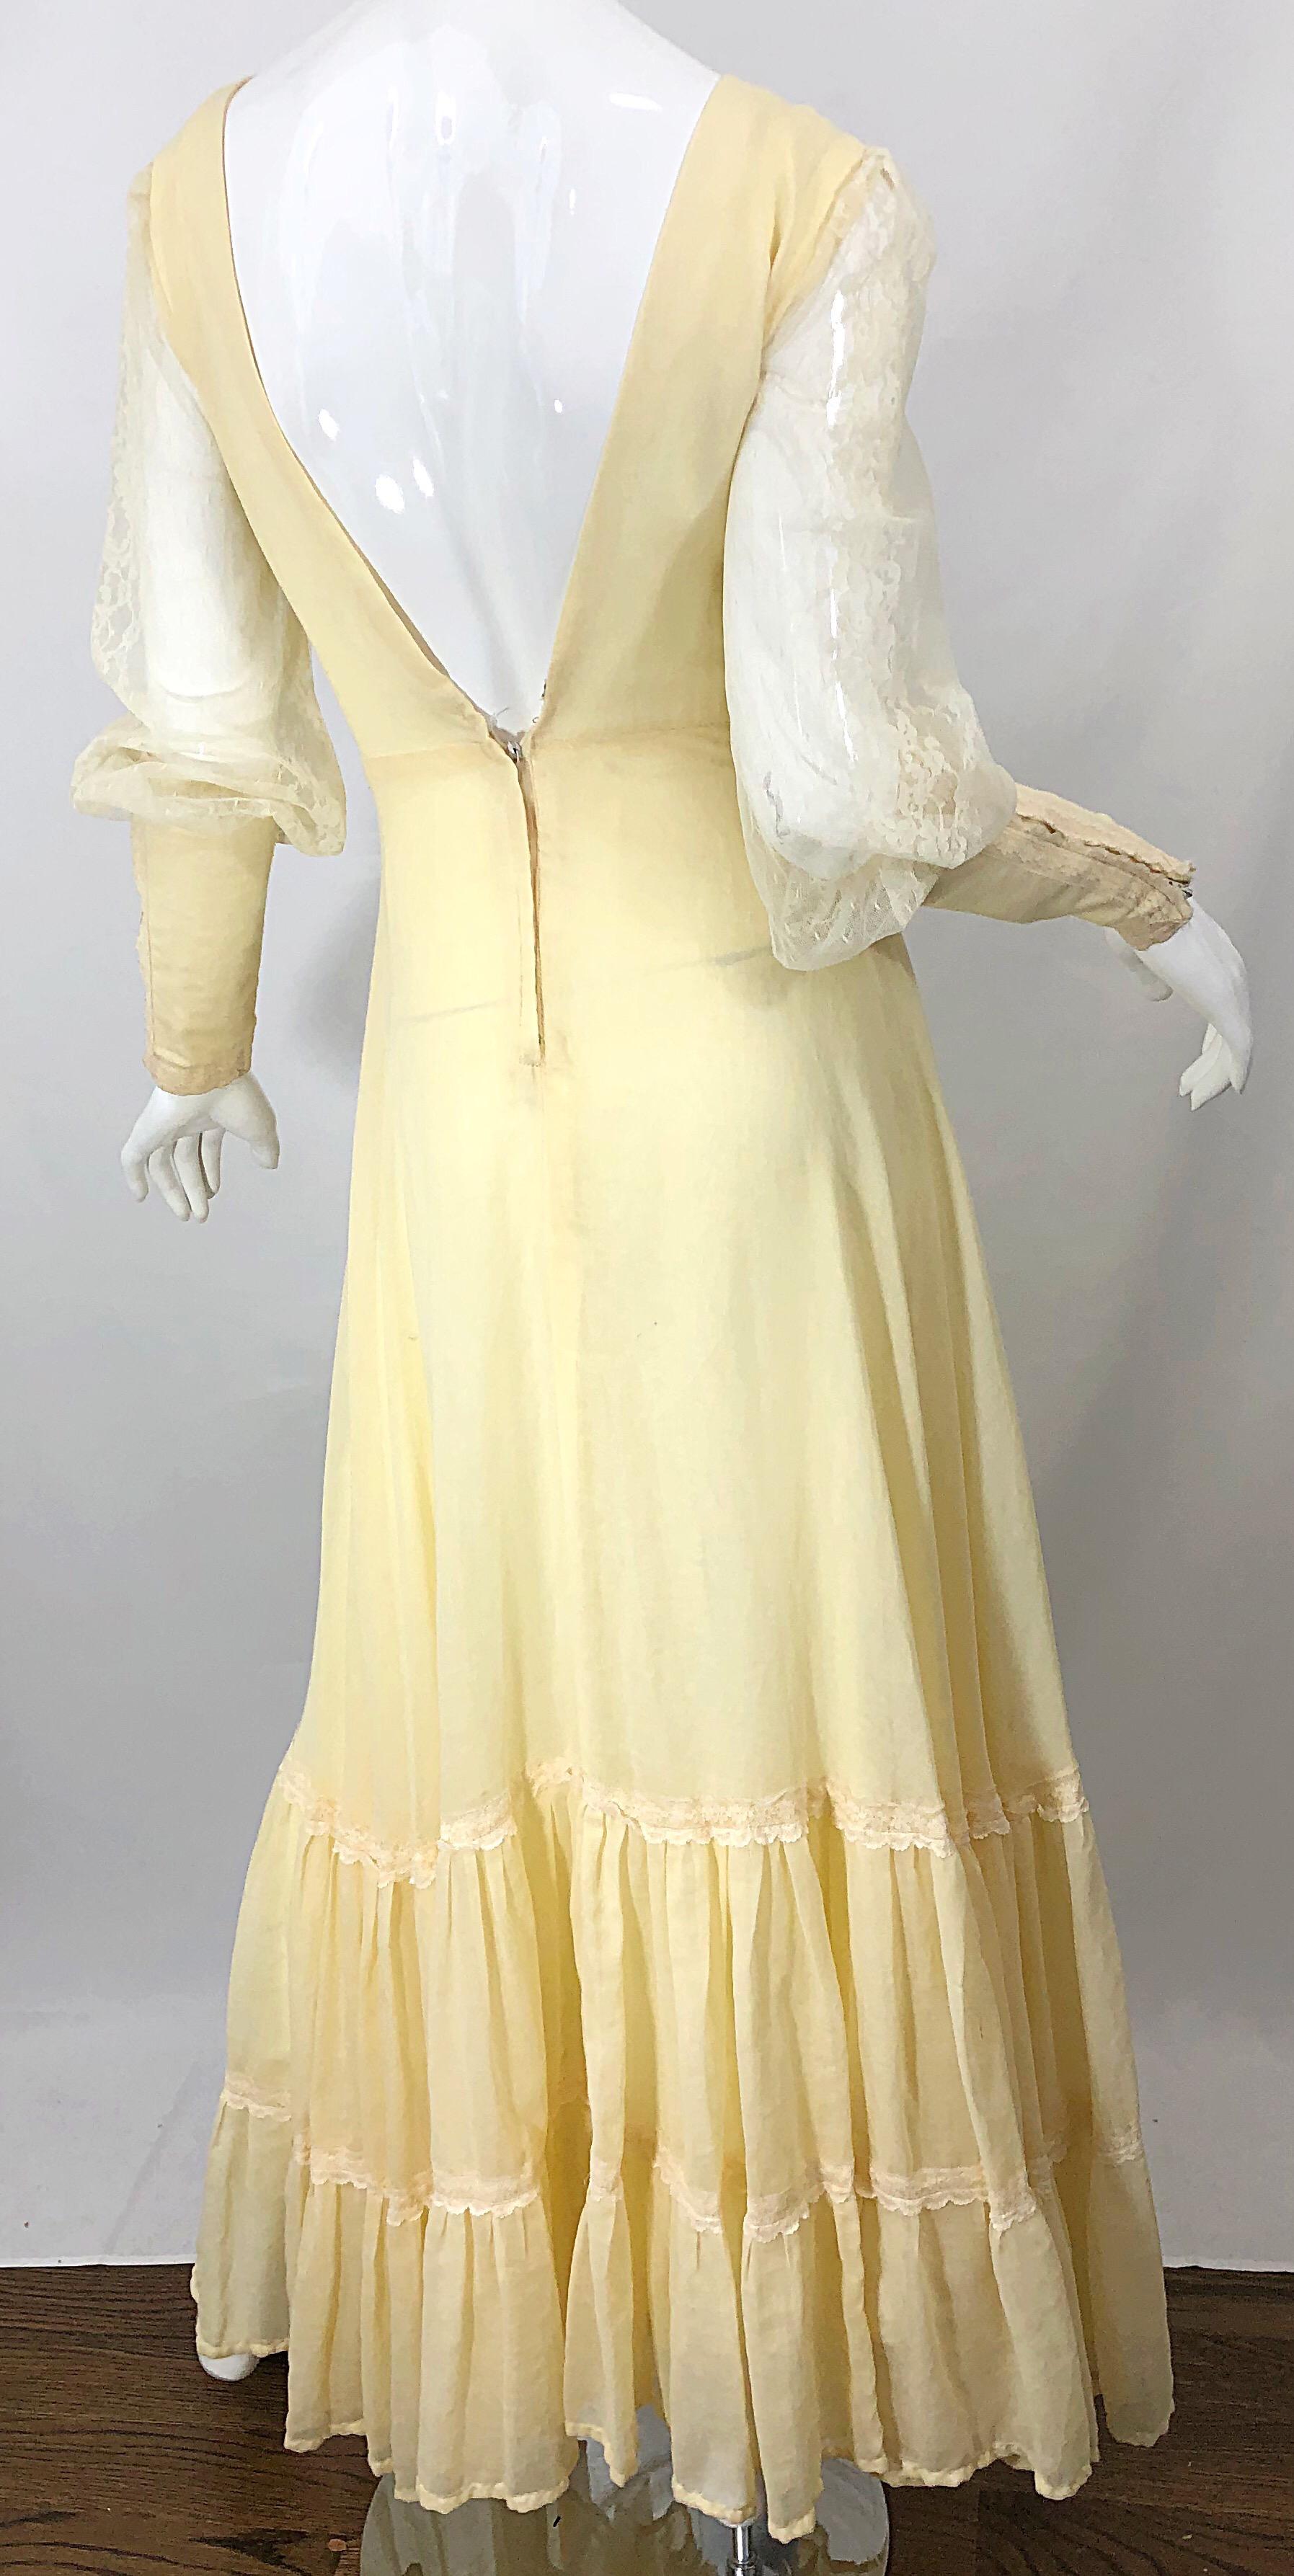 1970s Victorian Inspired Pale Yellow Cotton Voile + Lace Peasant 70s Maxi Dress For Sale 3